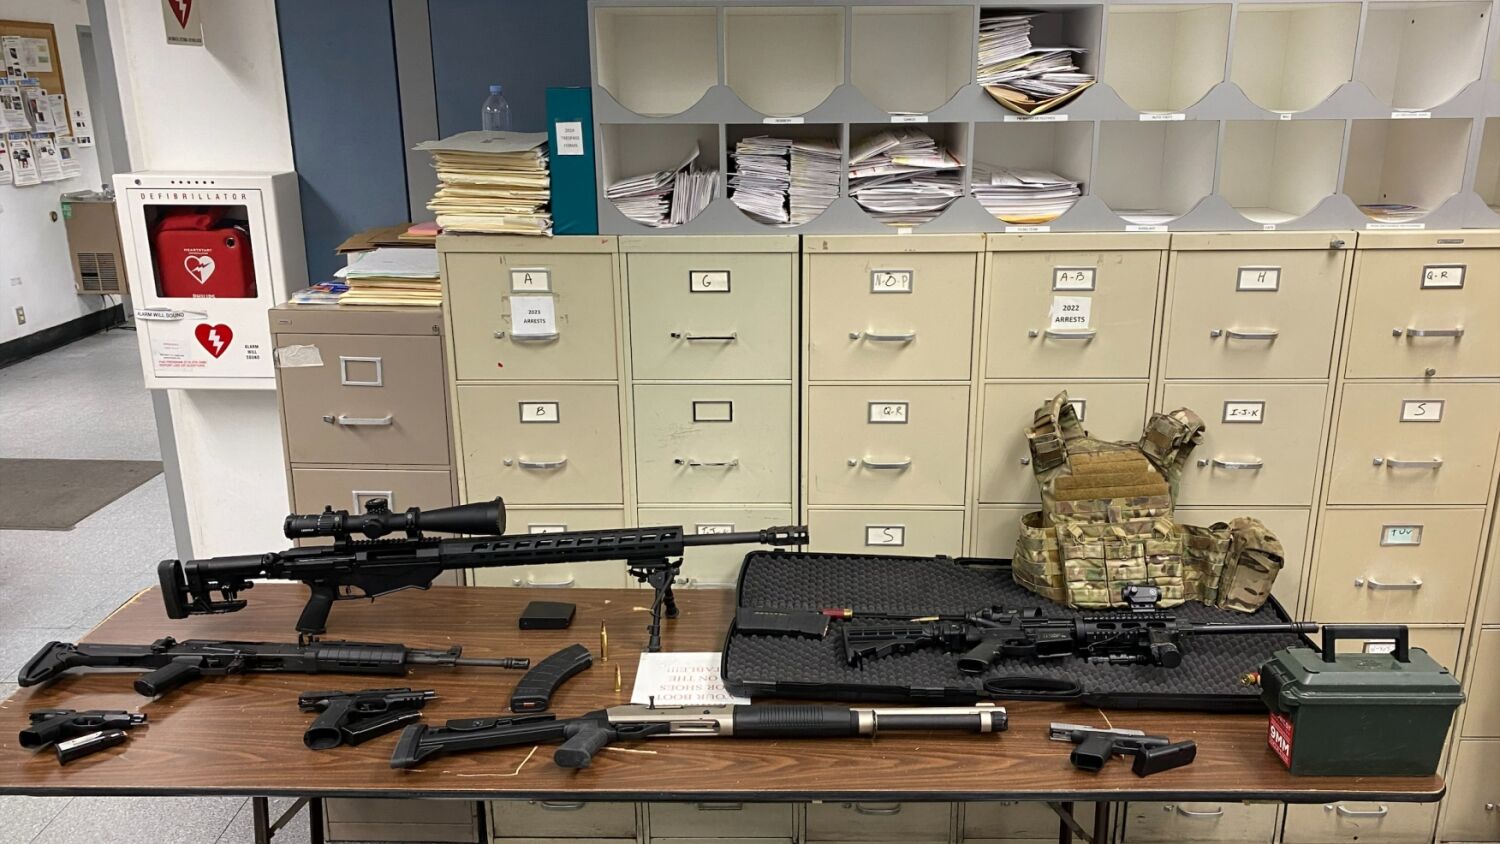 Police seize assault rifles, bulletproof vests, 1,000 rounds of ammo from Hollywood apartment 